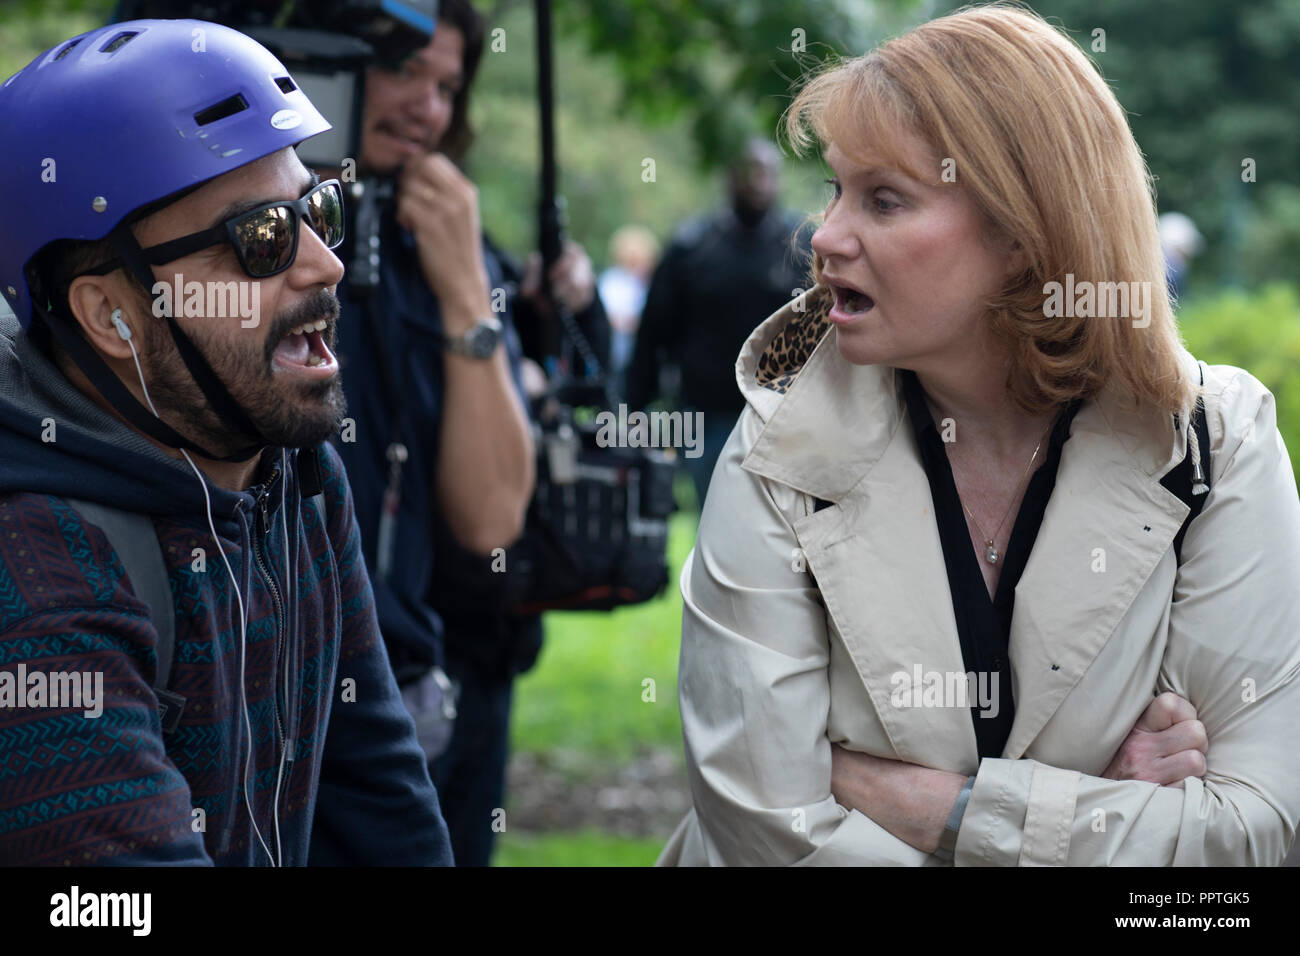 Washington DC, USA. 27th Sep 2018. Rally participants clash with a counter-protester during a rally in support of the Senate confirmation of Judge Brett Kavanaugh on Capitol Hill in Washington, DC on September 27, 2018. Credit: Alex Edelman/CNP /MediaPunch Credit: MediaPunch Inc/Alamy Live News Stock Photo